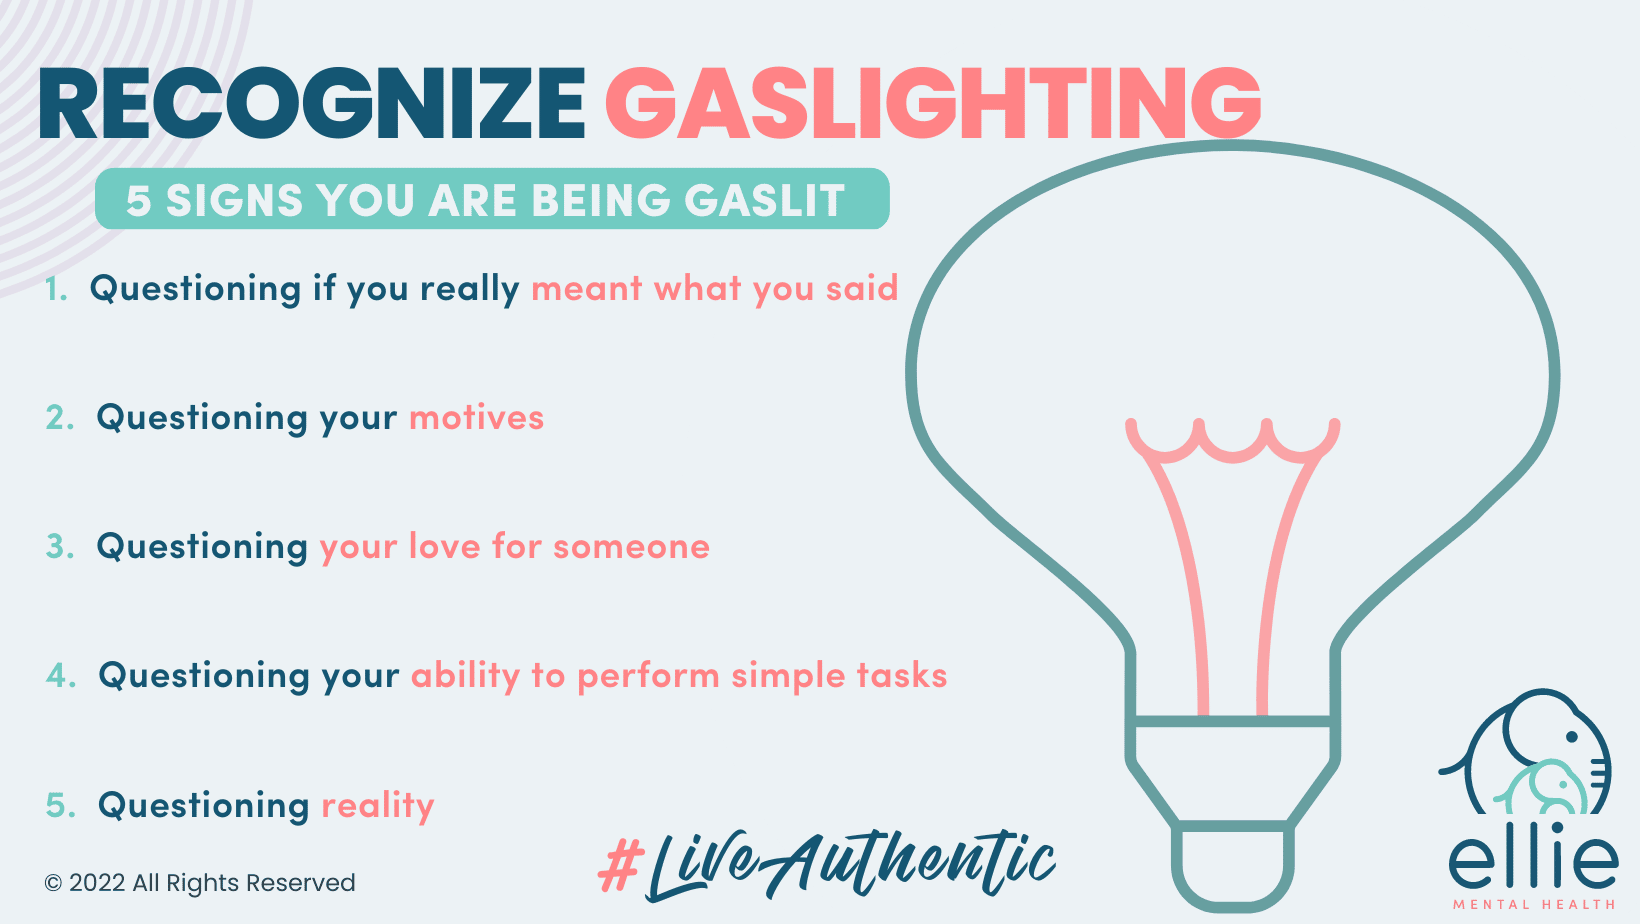 Recognize Gaslighting: 5 Signs You are Being Gaslit Infographic